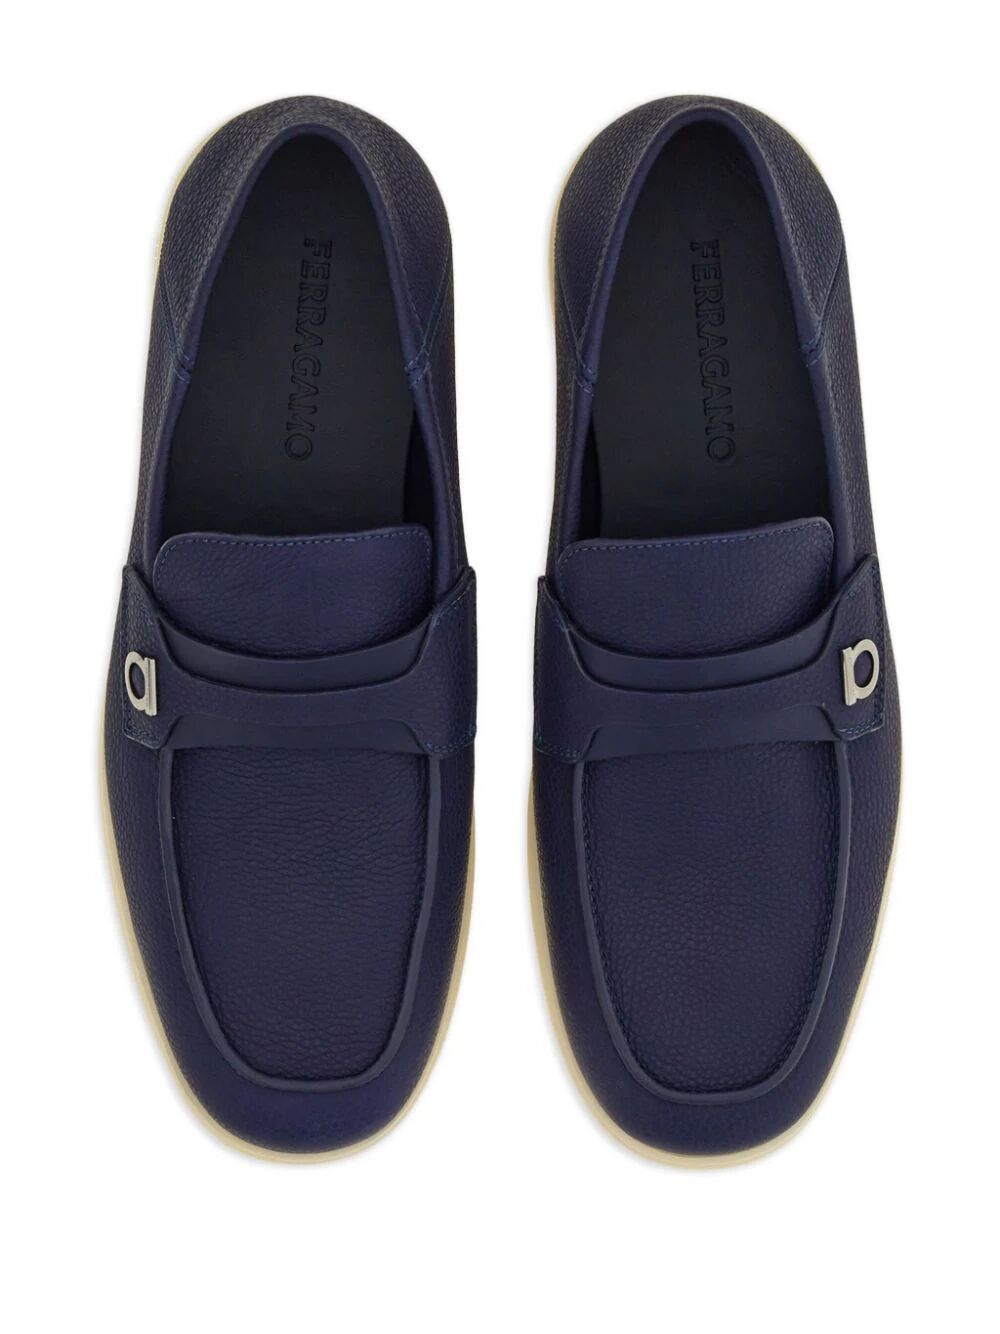 FERRAGAMO Classic Navy Blue Leather Loafers for Men